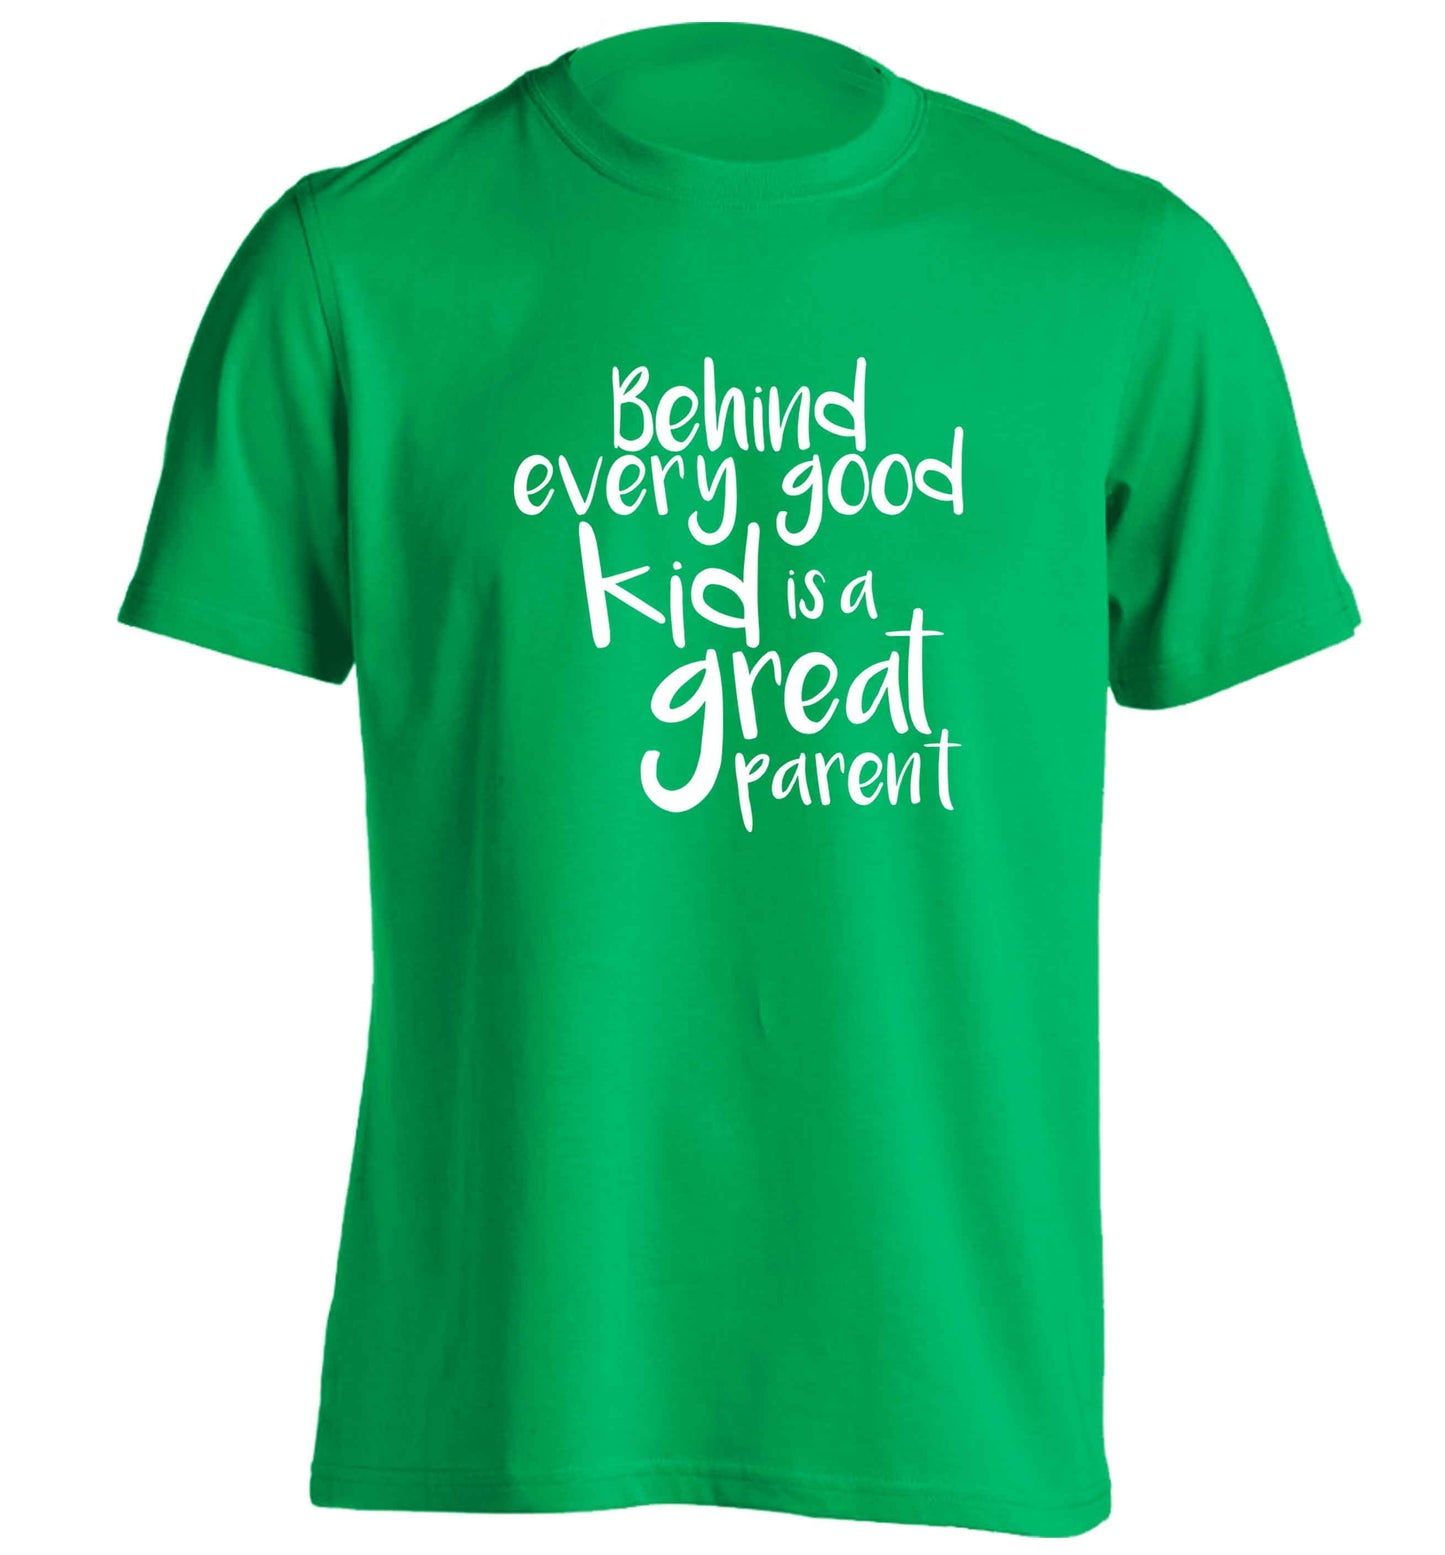 Behind every good kid is a great parent adults unisex green Tshirt small